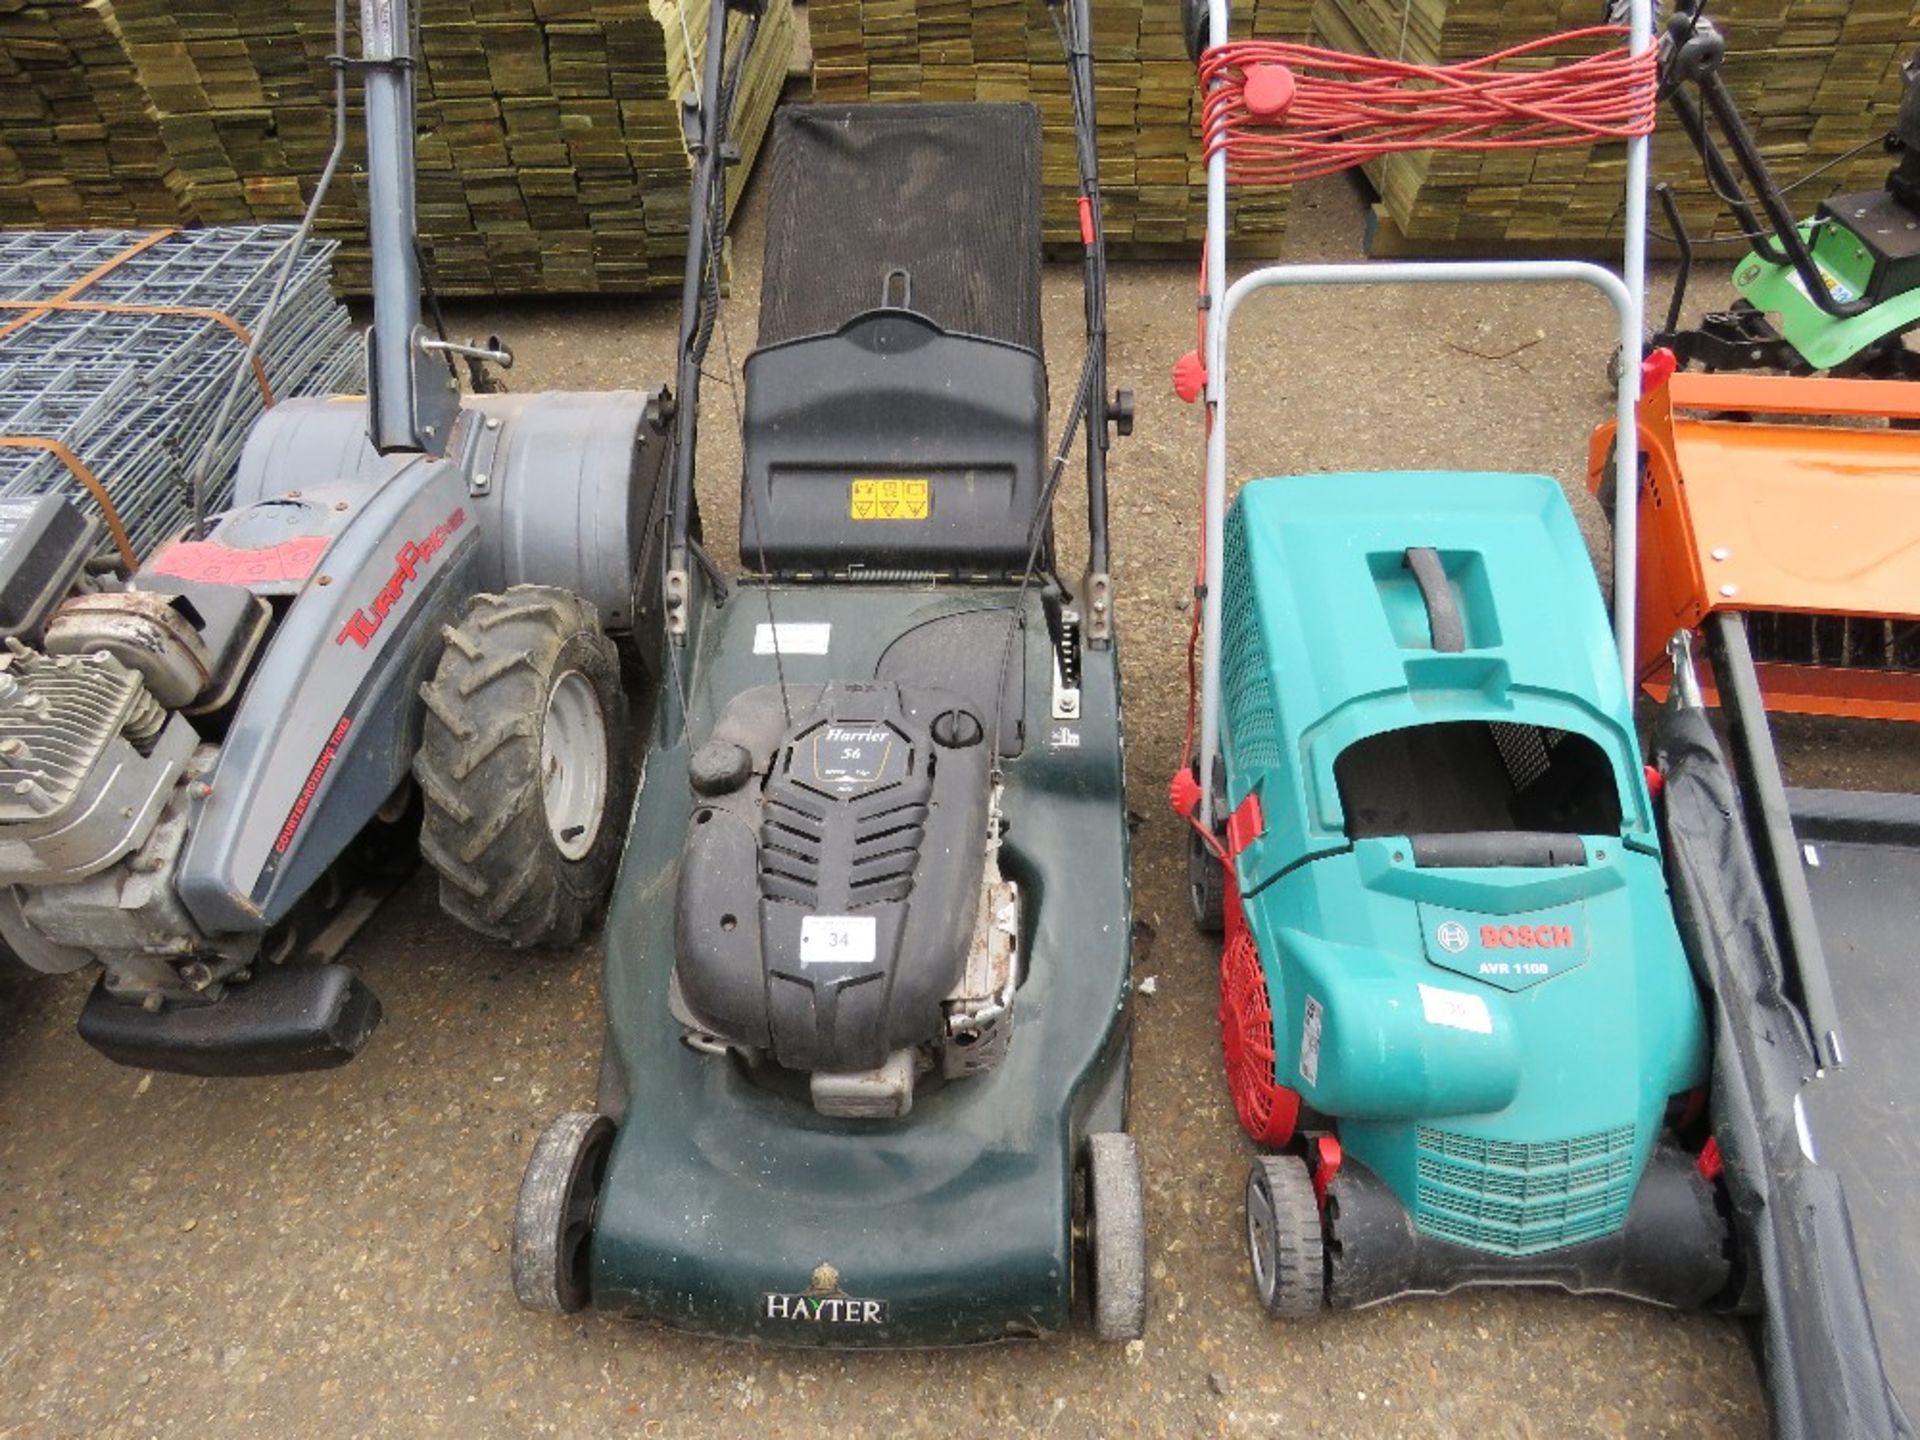 HAYTER HARRIER 56 MOWER WITH COLLECTOR. WHEN TESTED WAS SEEN TO RUN, DRIVE AND BLADES TURNED.